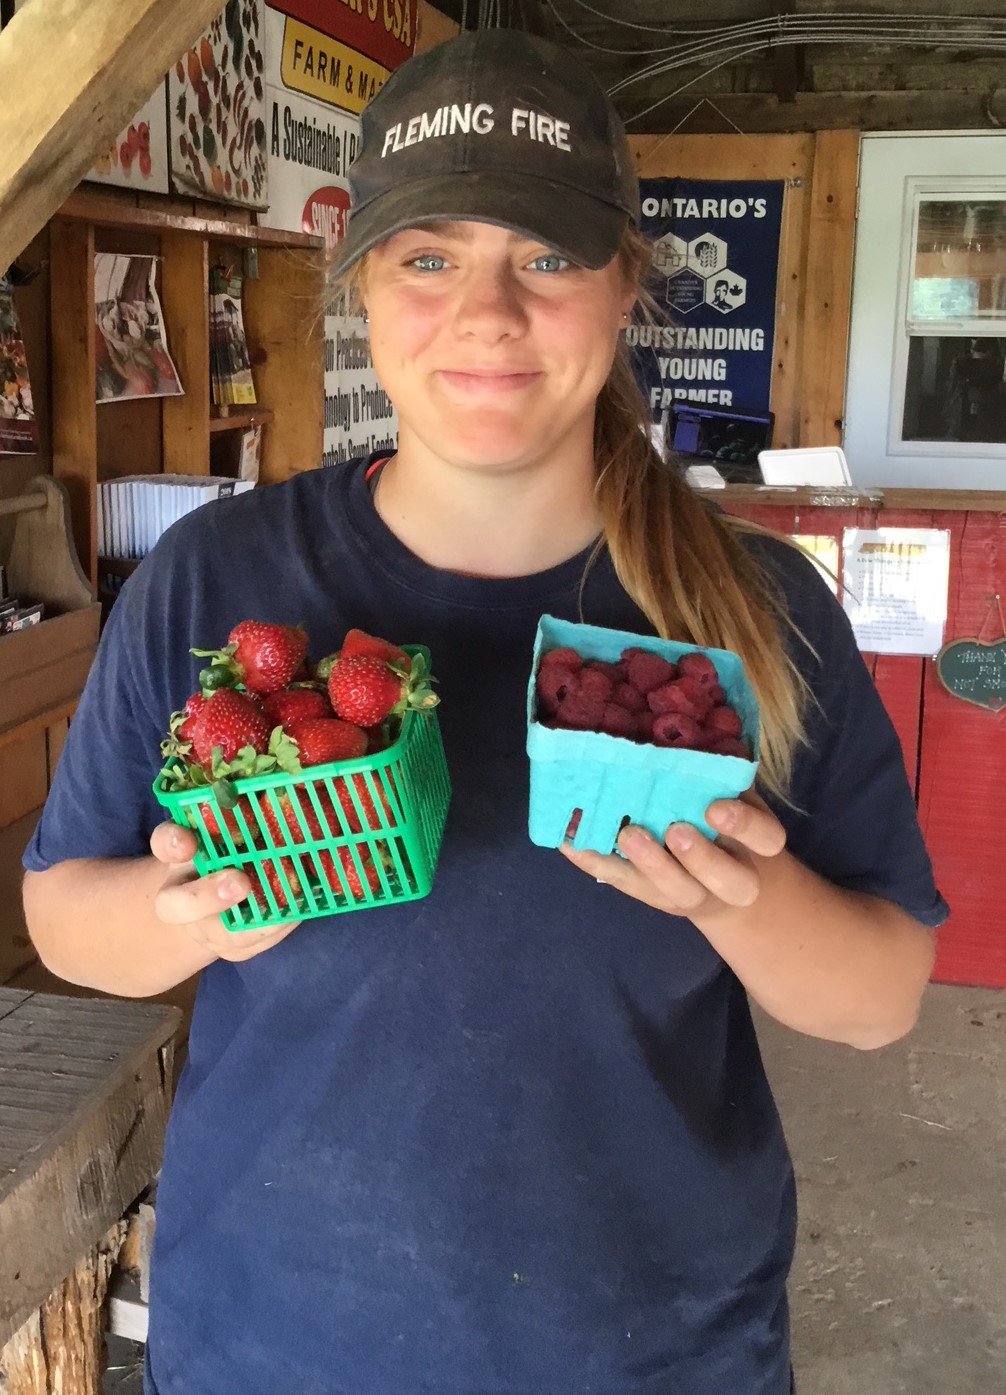 Previous Happening: week 9 Aug 7-12 The Farm Box - Strawberries are back!!